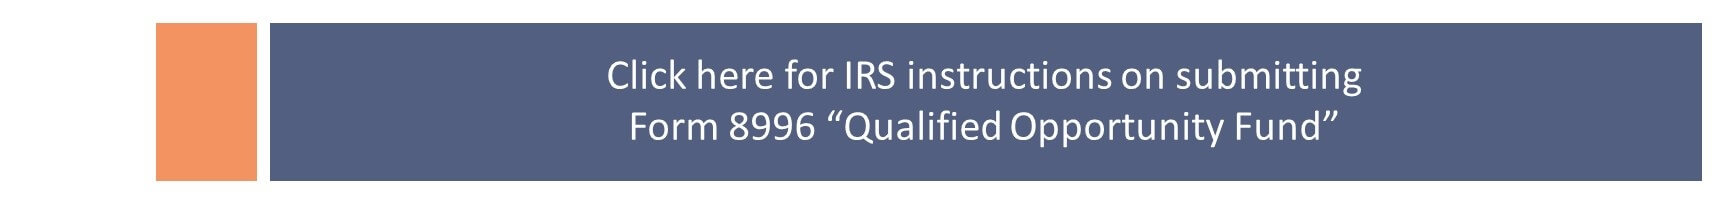 qualified-opportunity-fund-tax-benefits-rea-cpa